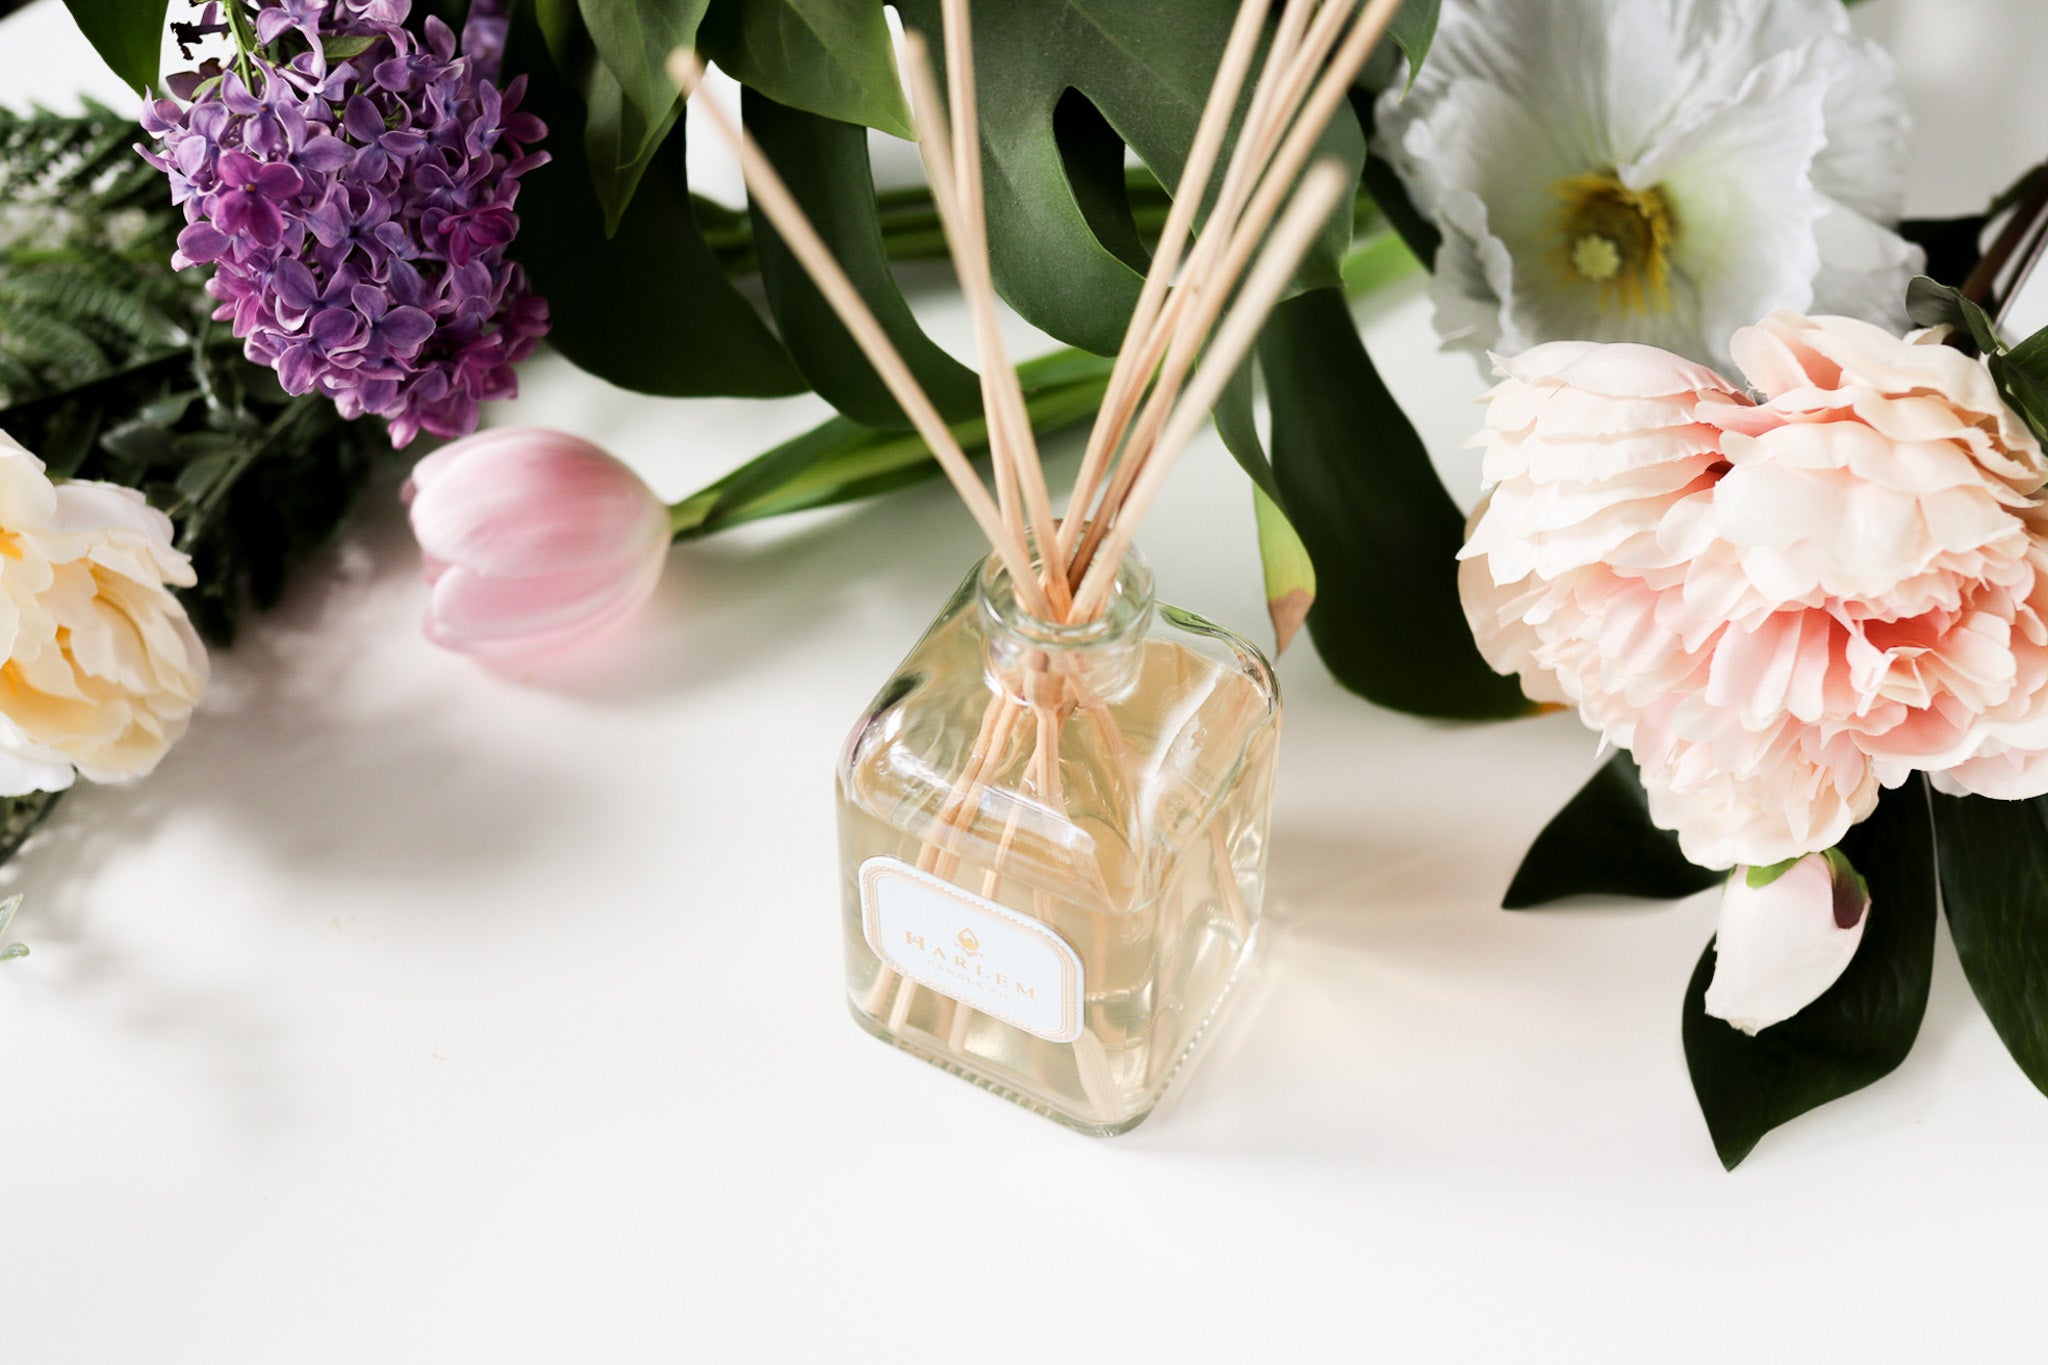 This is a horizontal image of the clear glass "Dream" Botanical Diffuser with purple and pink flowers.